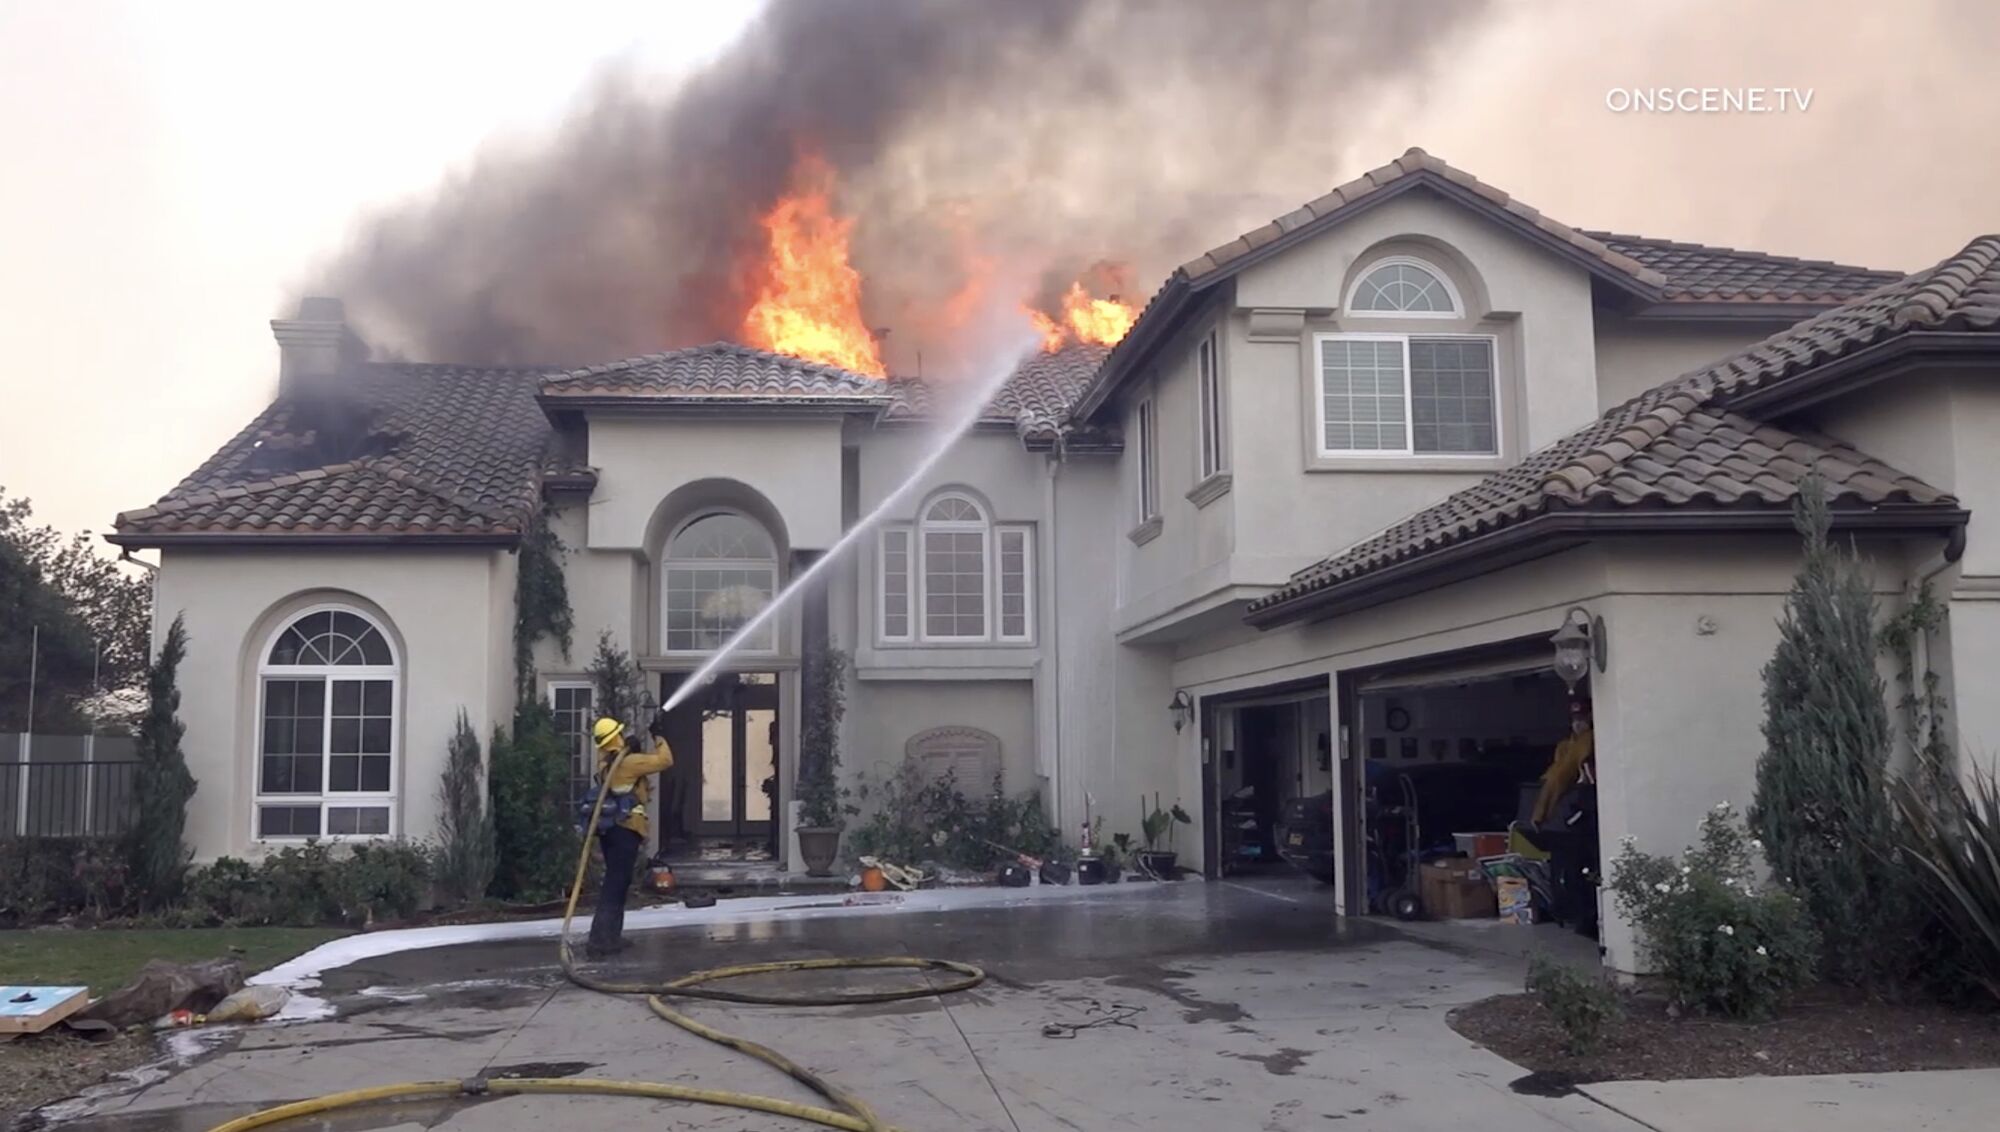 A firefighter hoses down a home fire in Yorba Linda that was sparked Monday by the Blue Ridge fire.